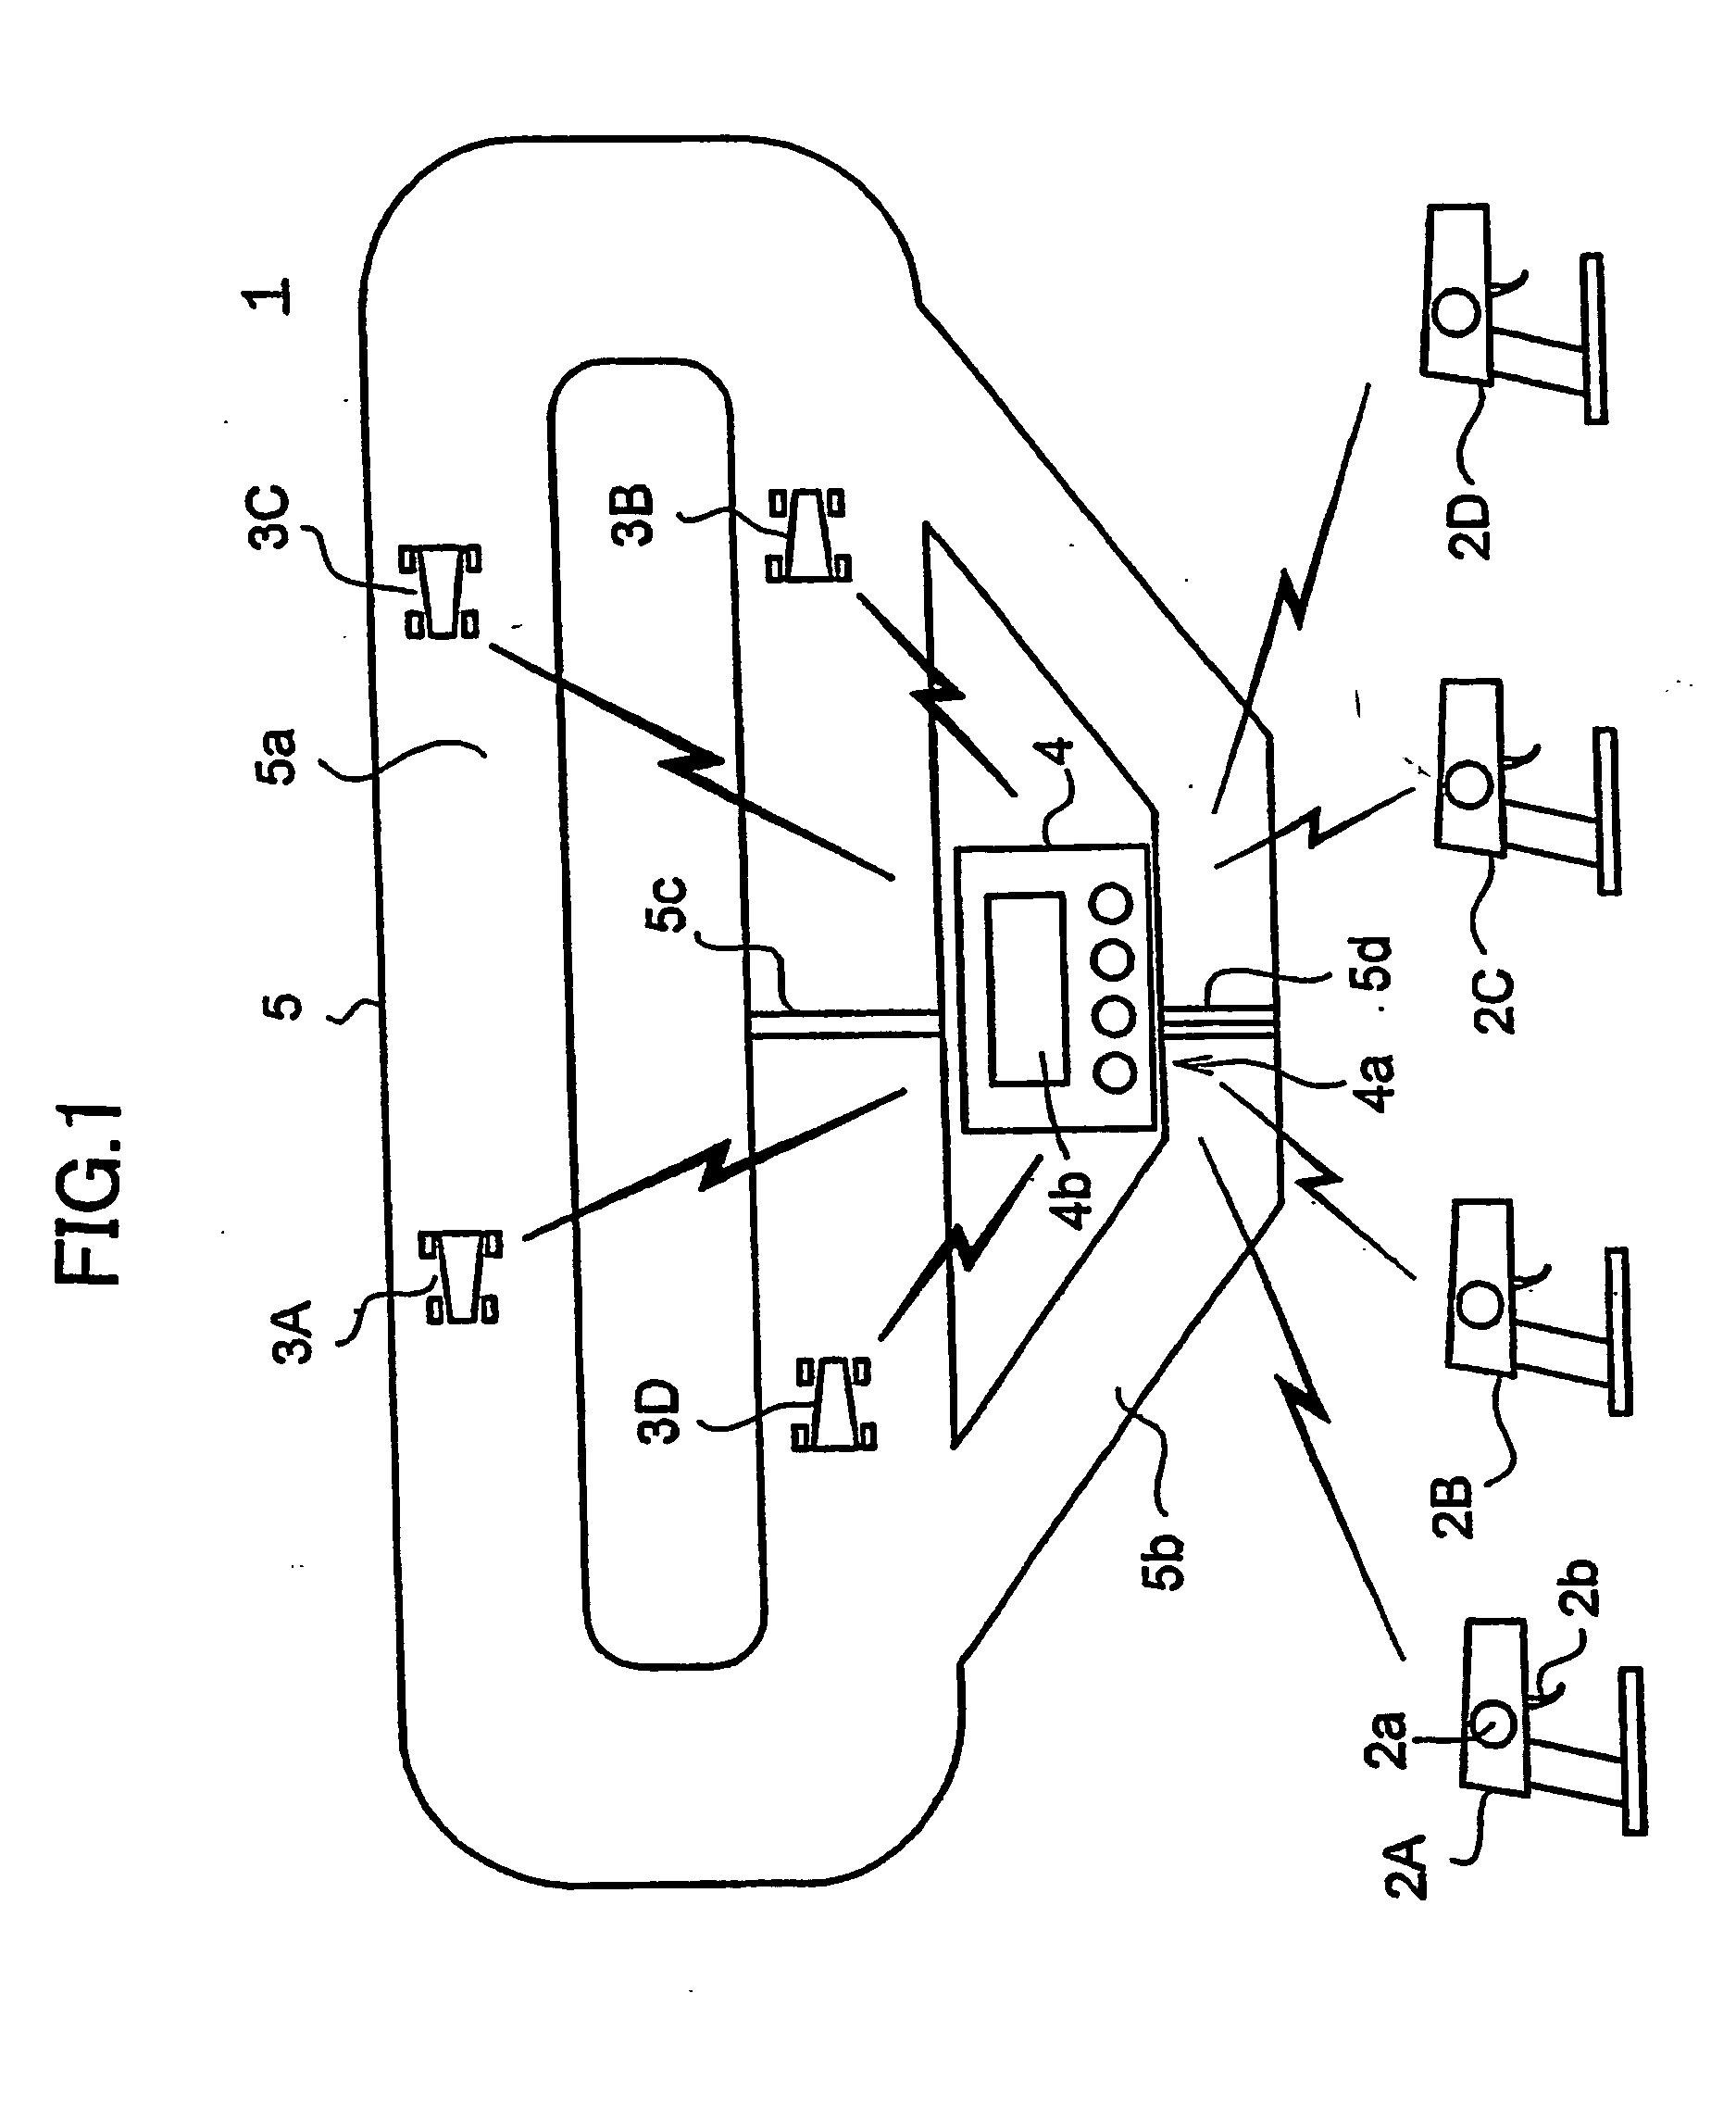 Remote control toy system, and controller, model and accessory device to be used in the same